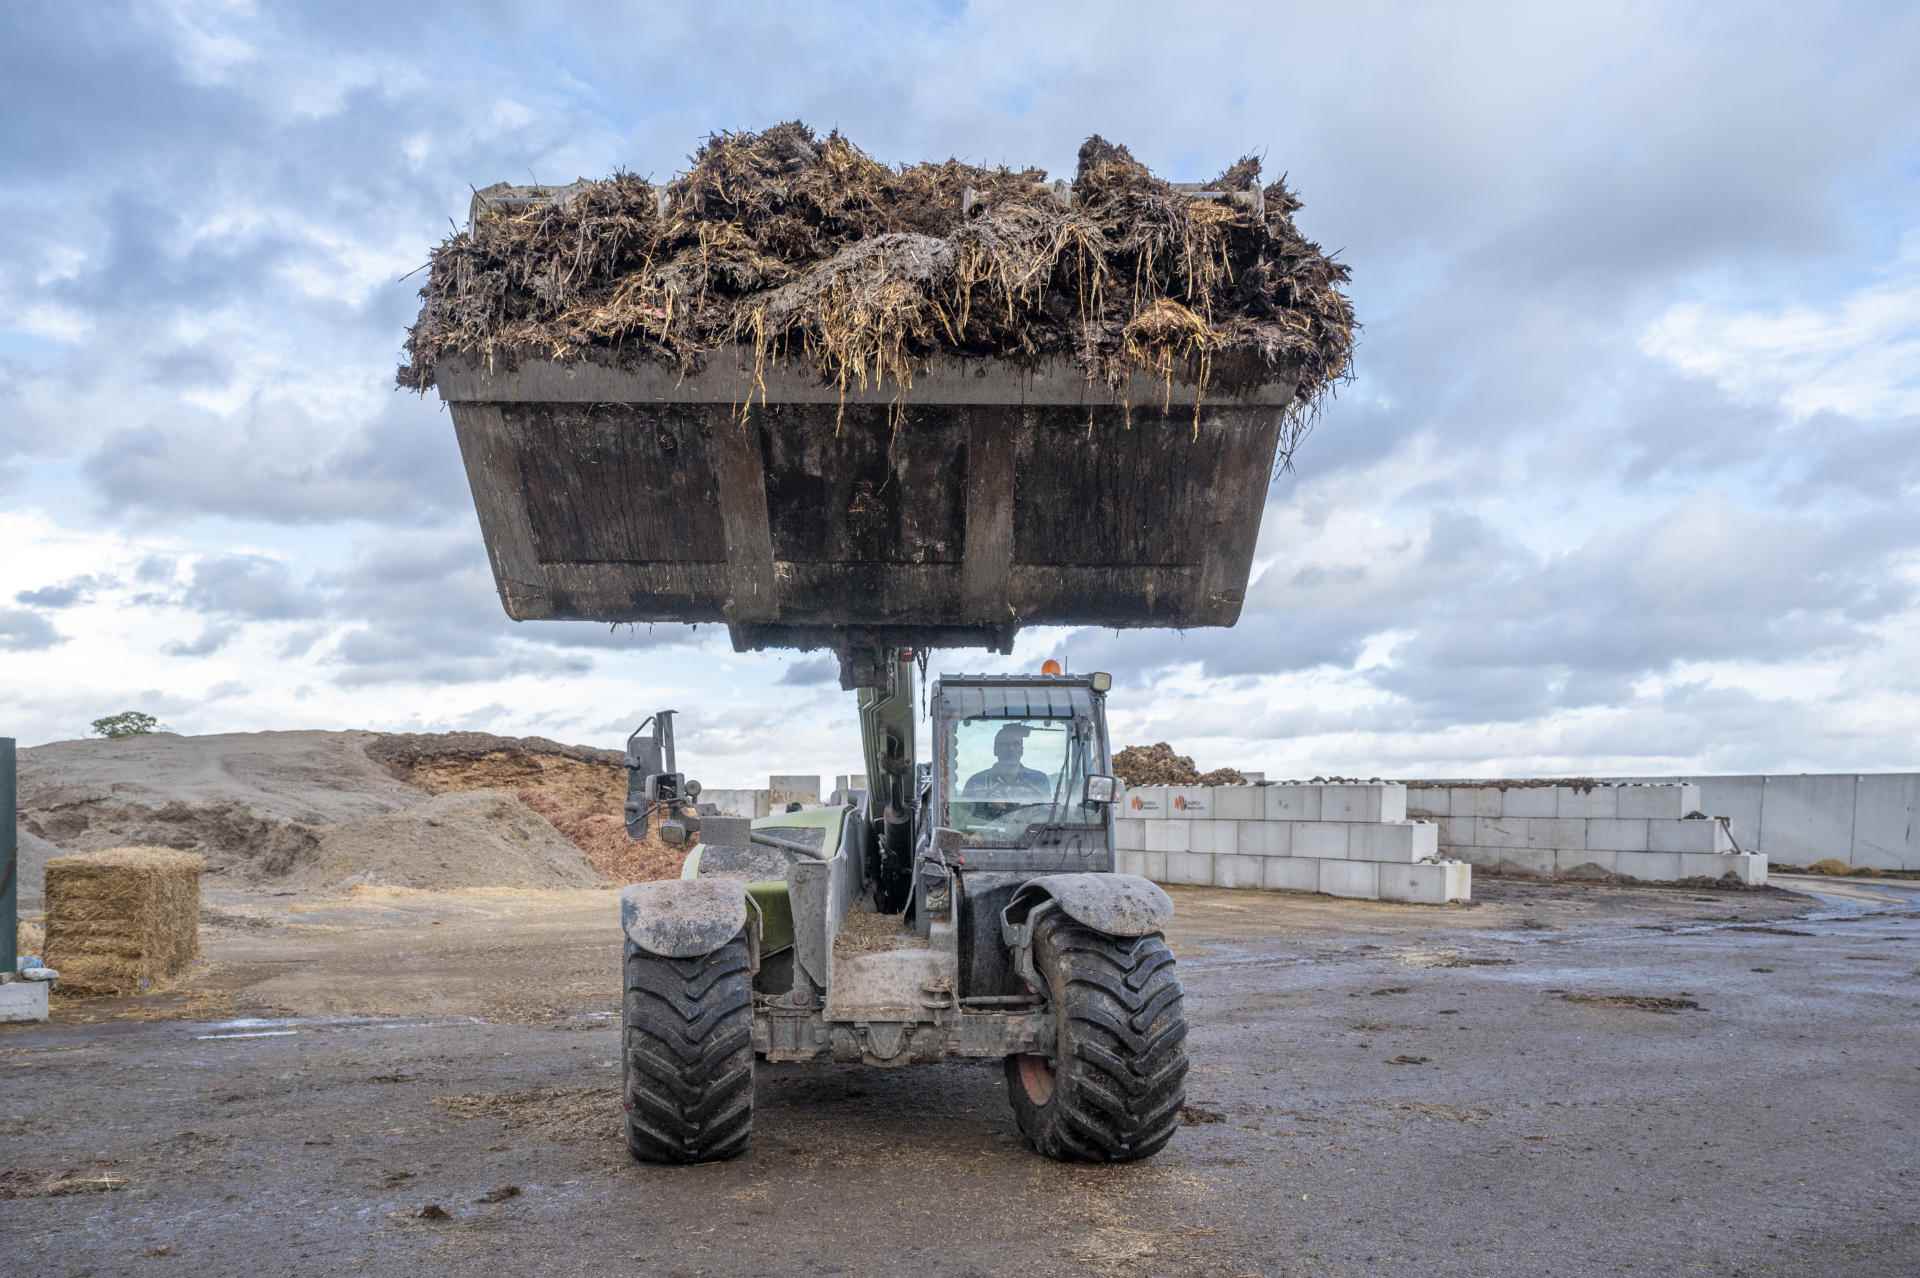 Loading manure to feed the methanizers, at the Parvillers farm, in Sempigny (Oise), October 24, 2022.